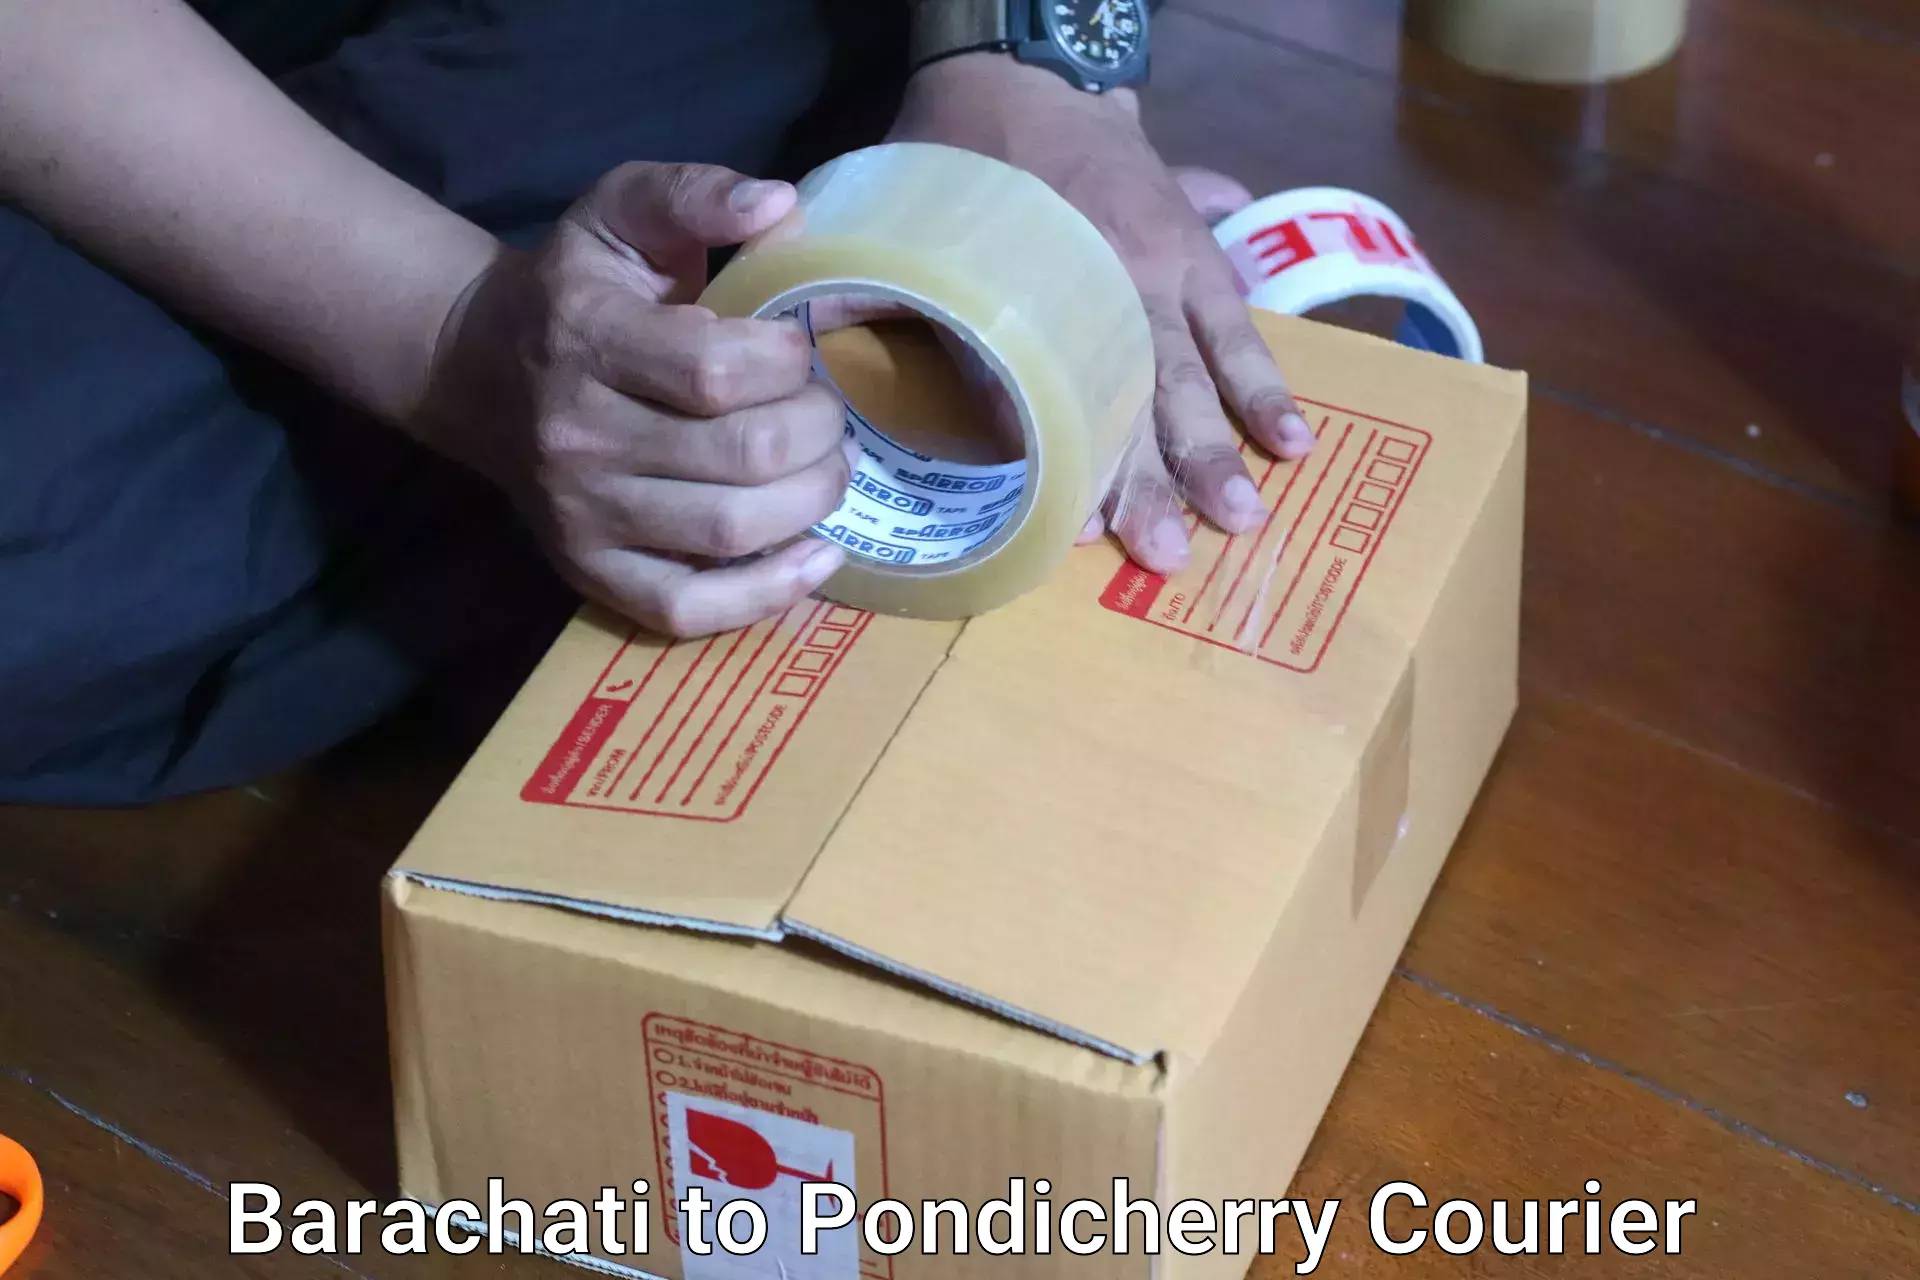 Luggage shipping specialists Barachati to Pondicherry